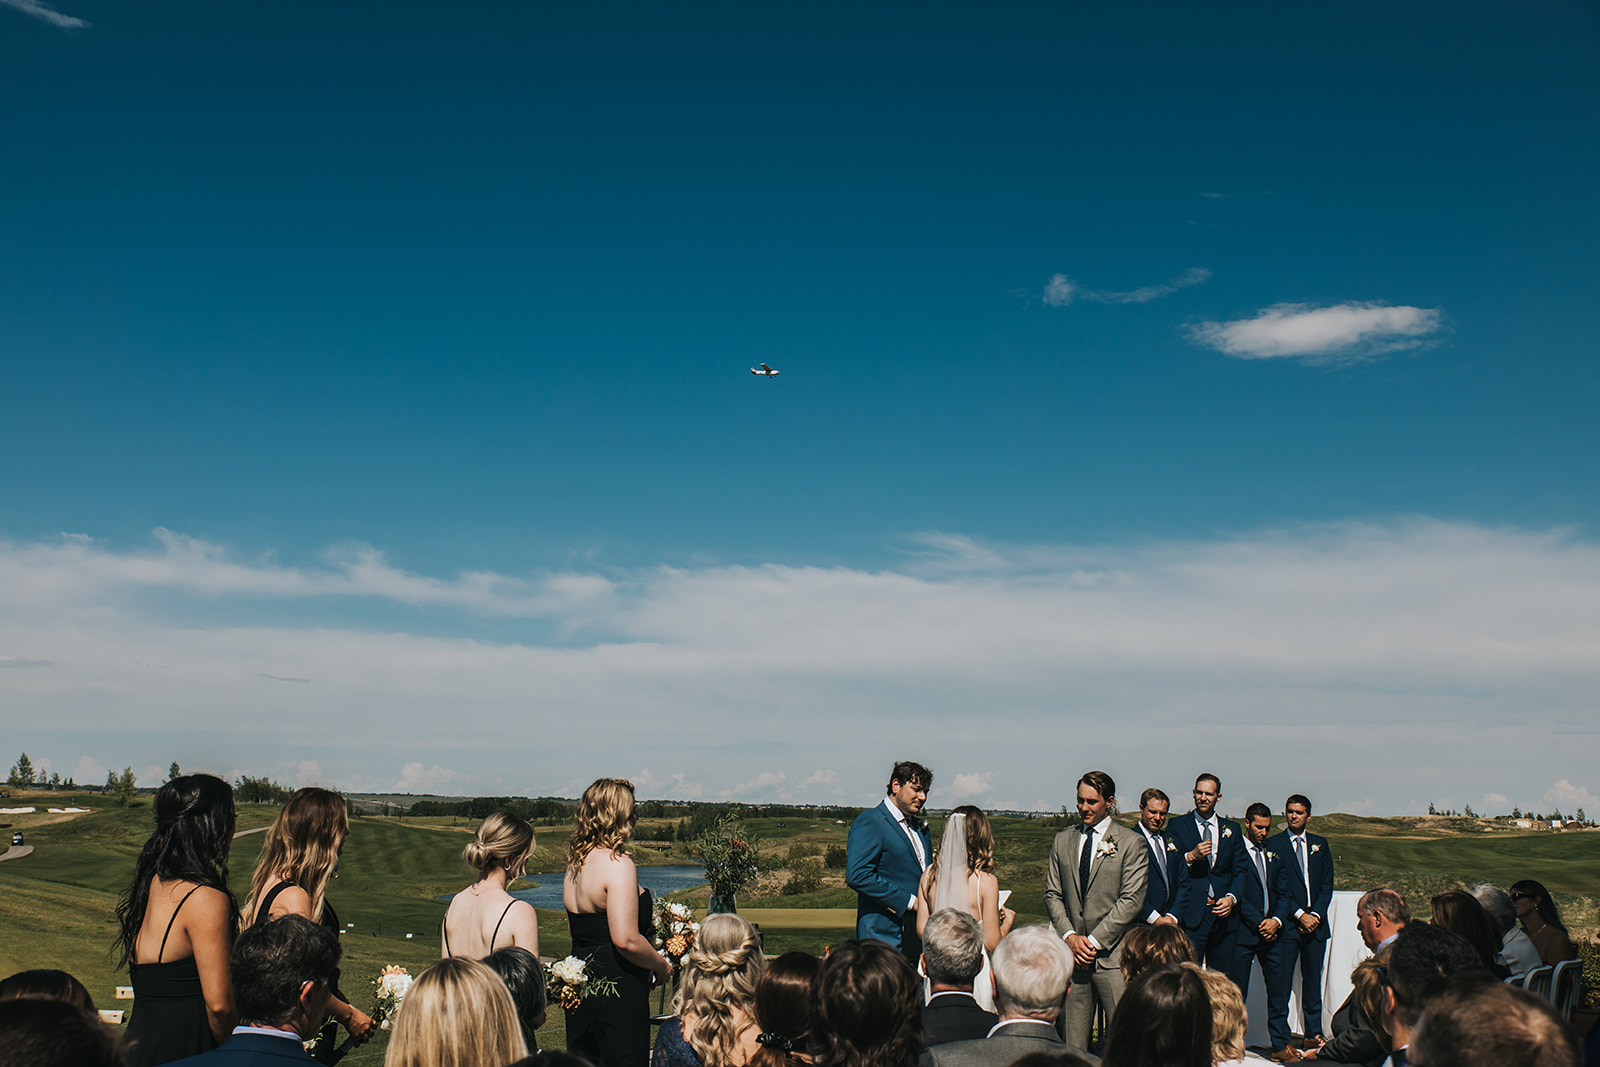 Thomas and Michelle Say I Do: A Mickelson National Golf Club Wedding
